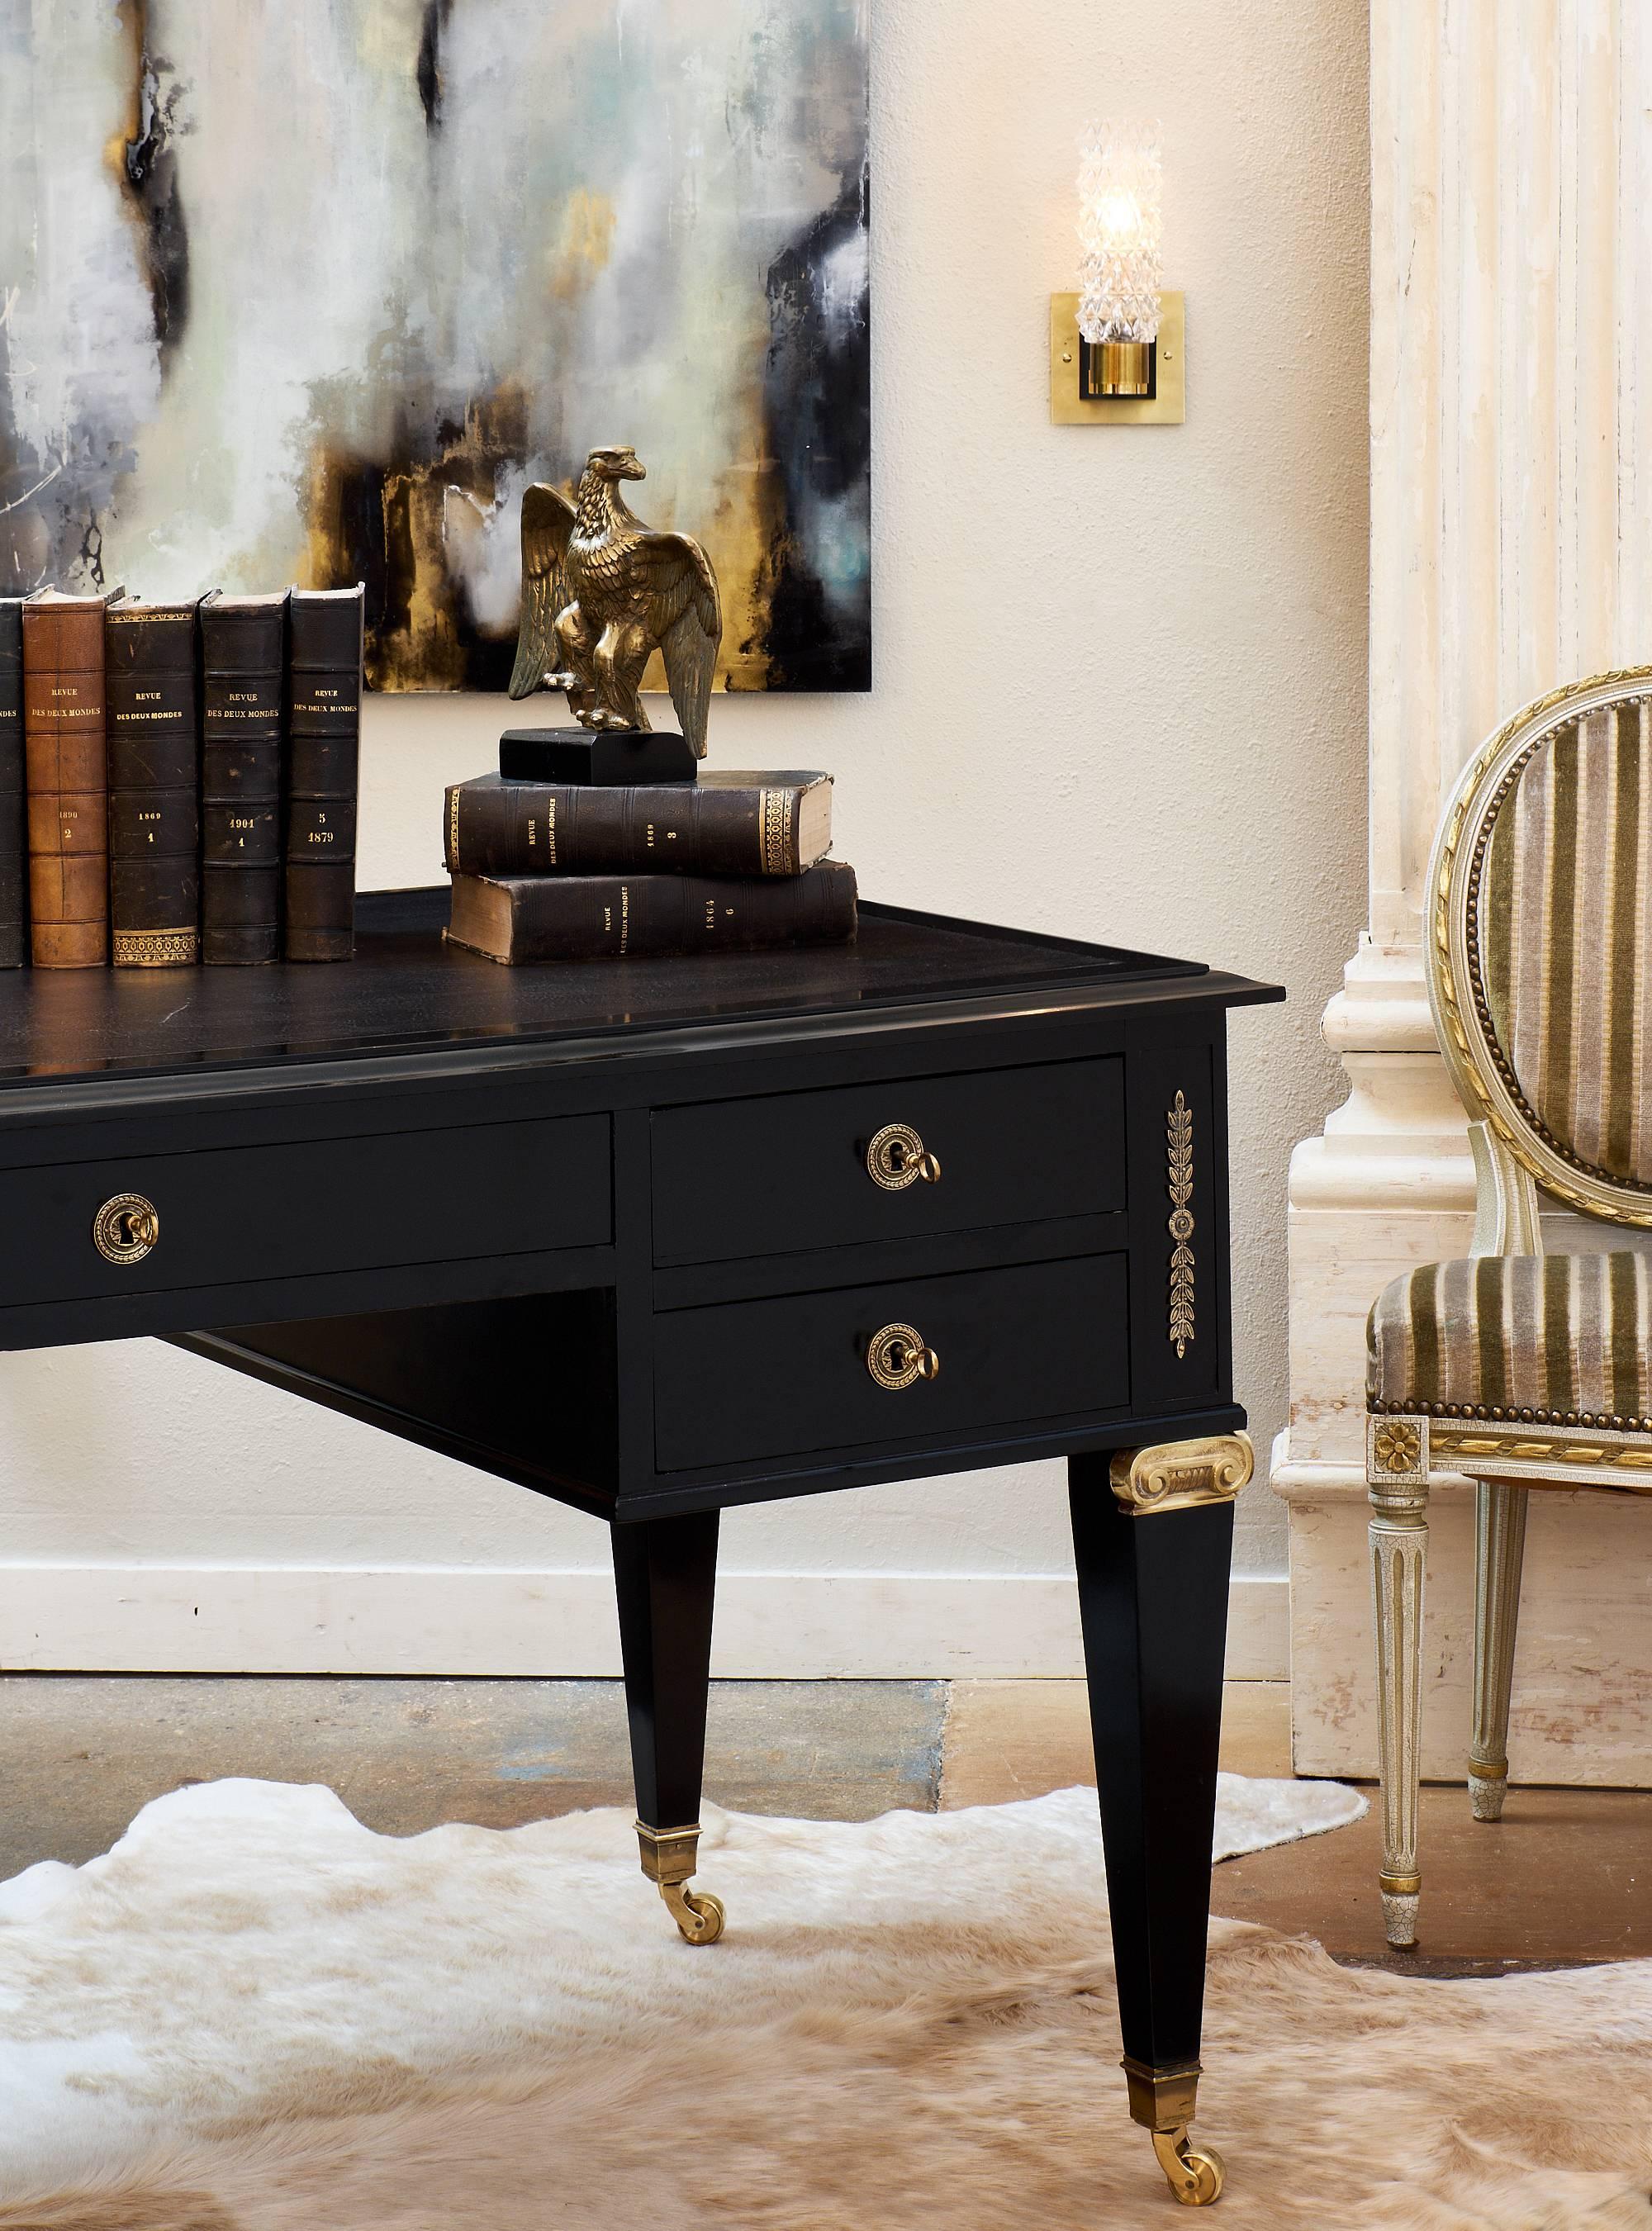 Wonderful Directoire style antique French desk with rich ormolu decor of foliage and scrolls, casters, and a black leather top. The superb museum quality French polish finish brings luster to the ebonized mahogany piece. Working locks and original